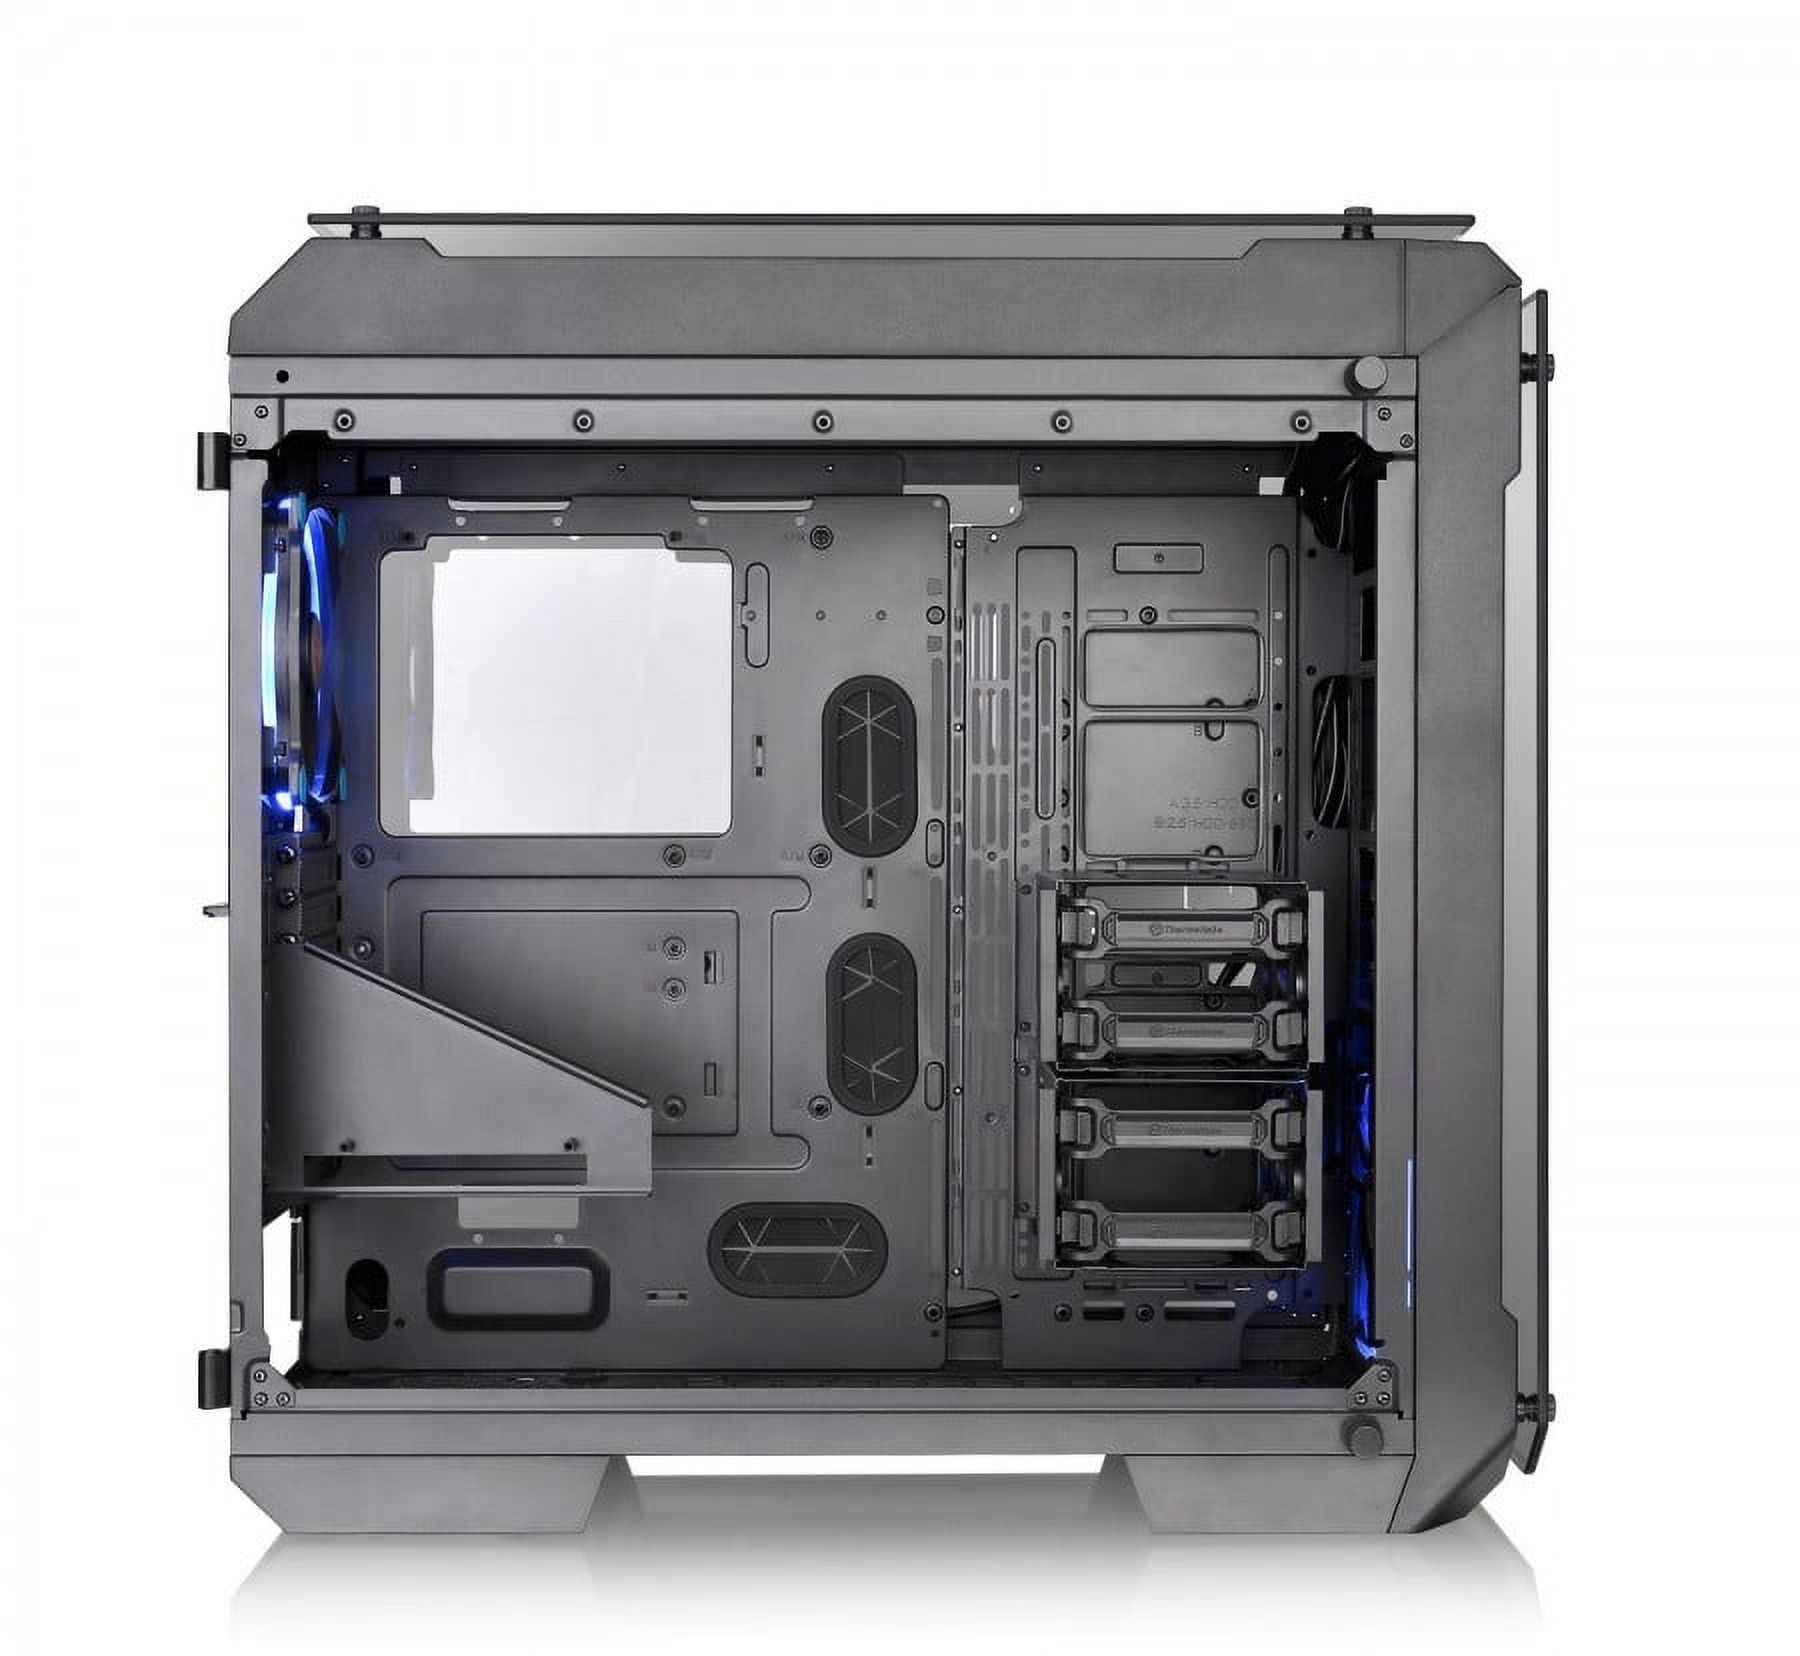 Thermaltake View 71 E-ATX Full Tower Computer Case - Black. - image 3 of 5